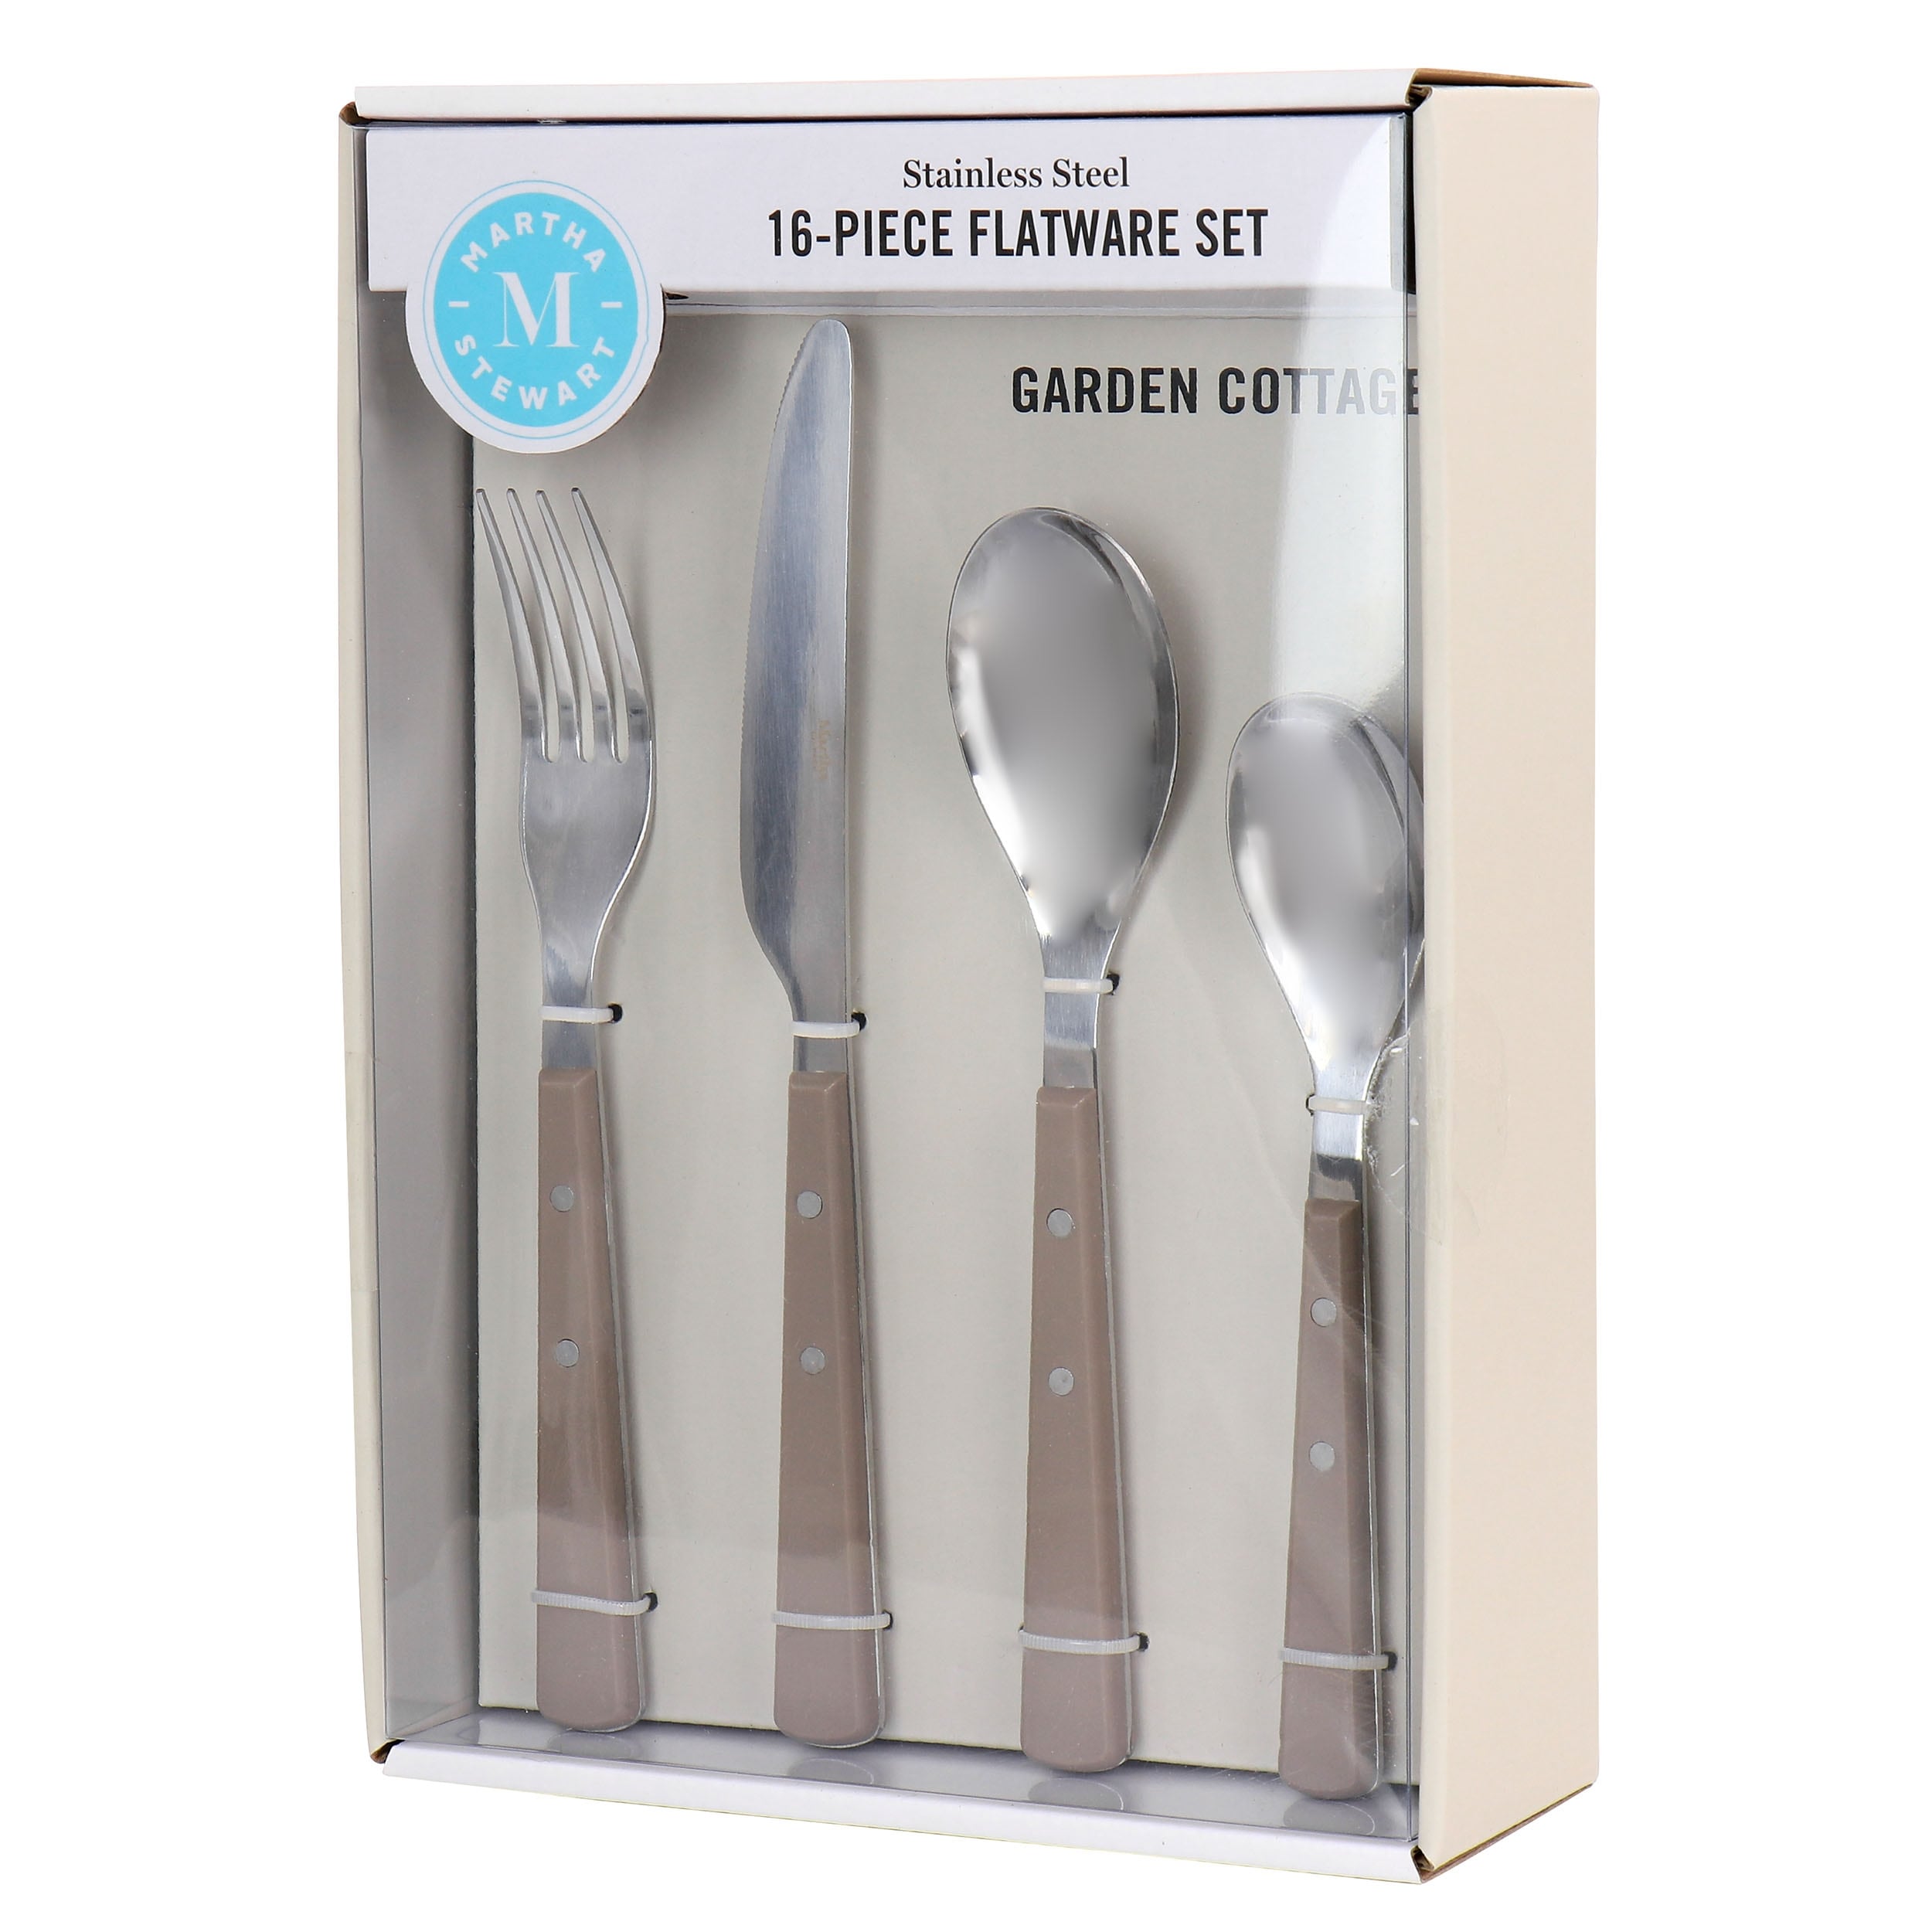 https://ak1.ostkcdn.com/images/products/is/images/direct/75450b18e9bb0daa54c21930e8ebe26130b0aa43/Martha-Stewart-Garden-Cottage-16pc-Stainless-Steel-Flatware-Set--Taupe.jpg